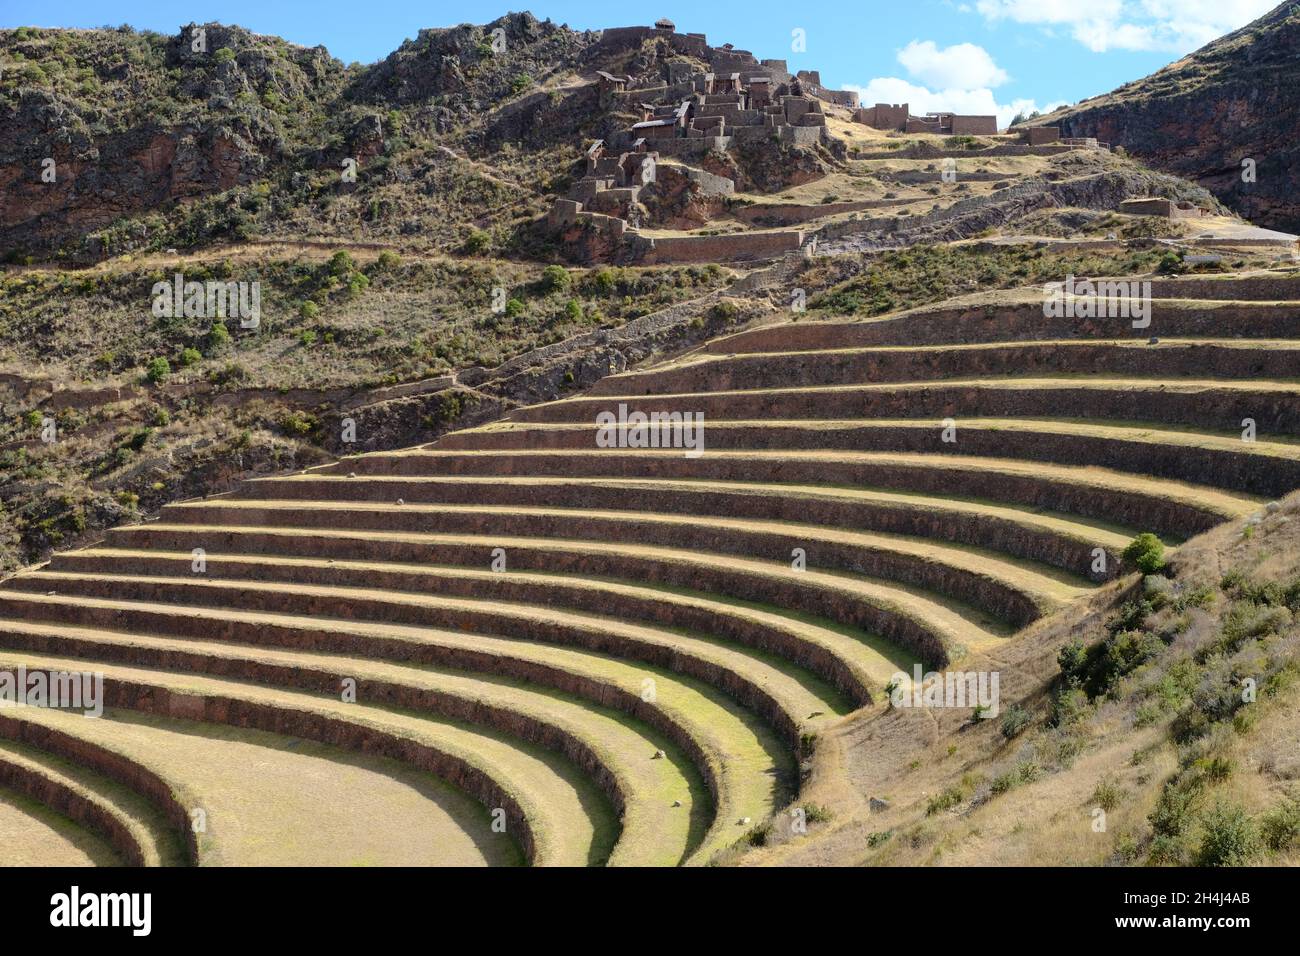 Peru Sacred Valley Pisac - Inca agricultural terraces Stock Photo